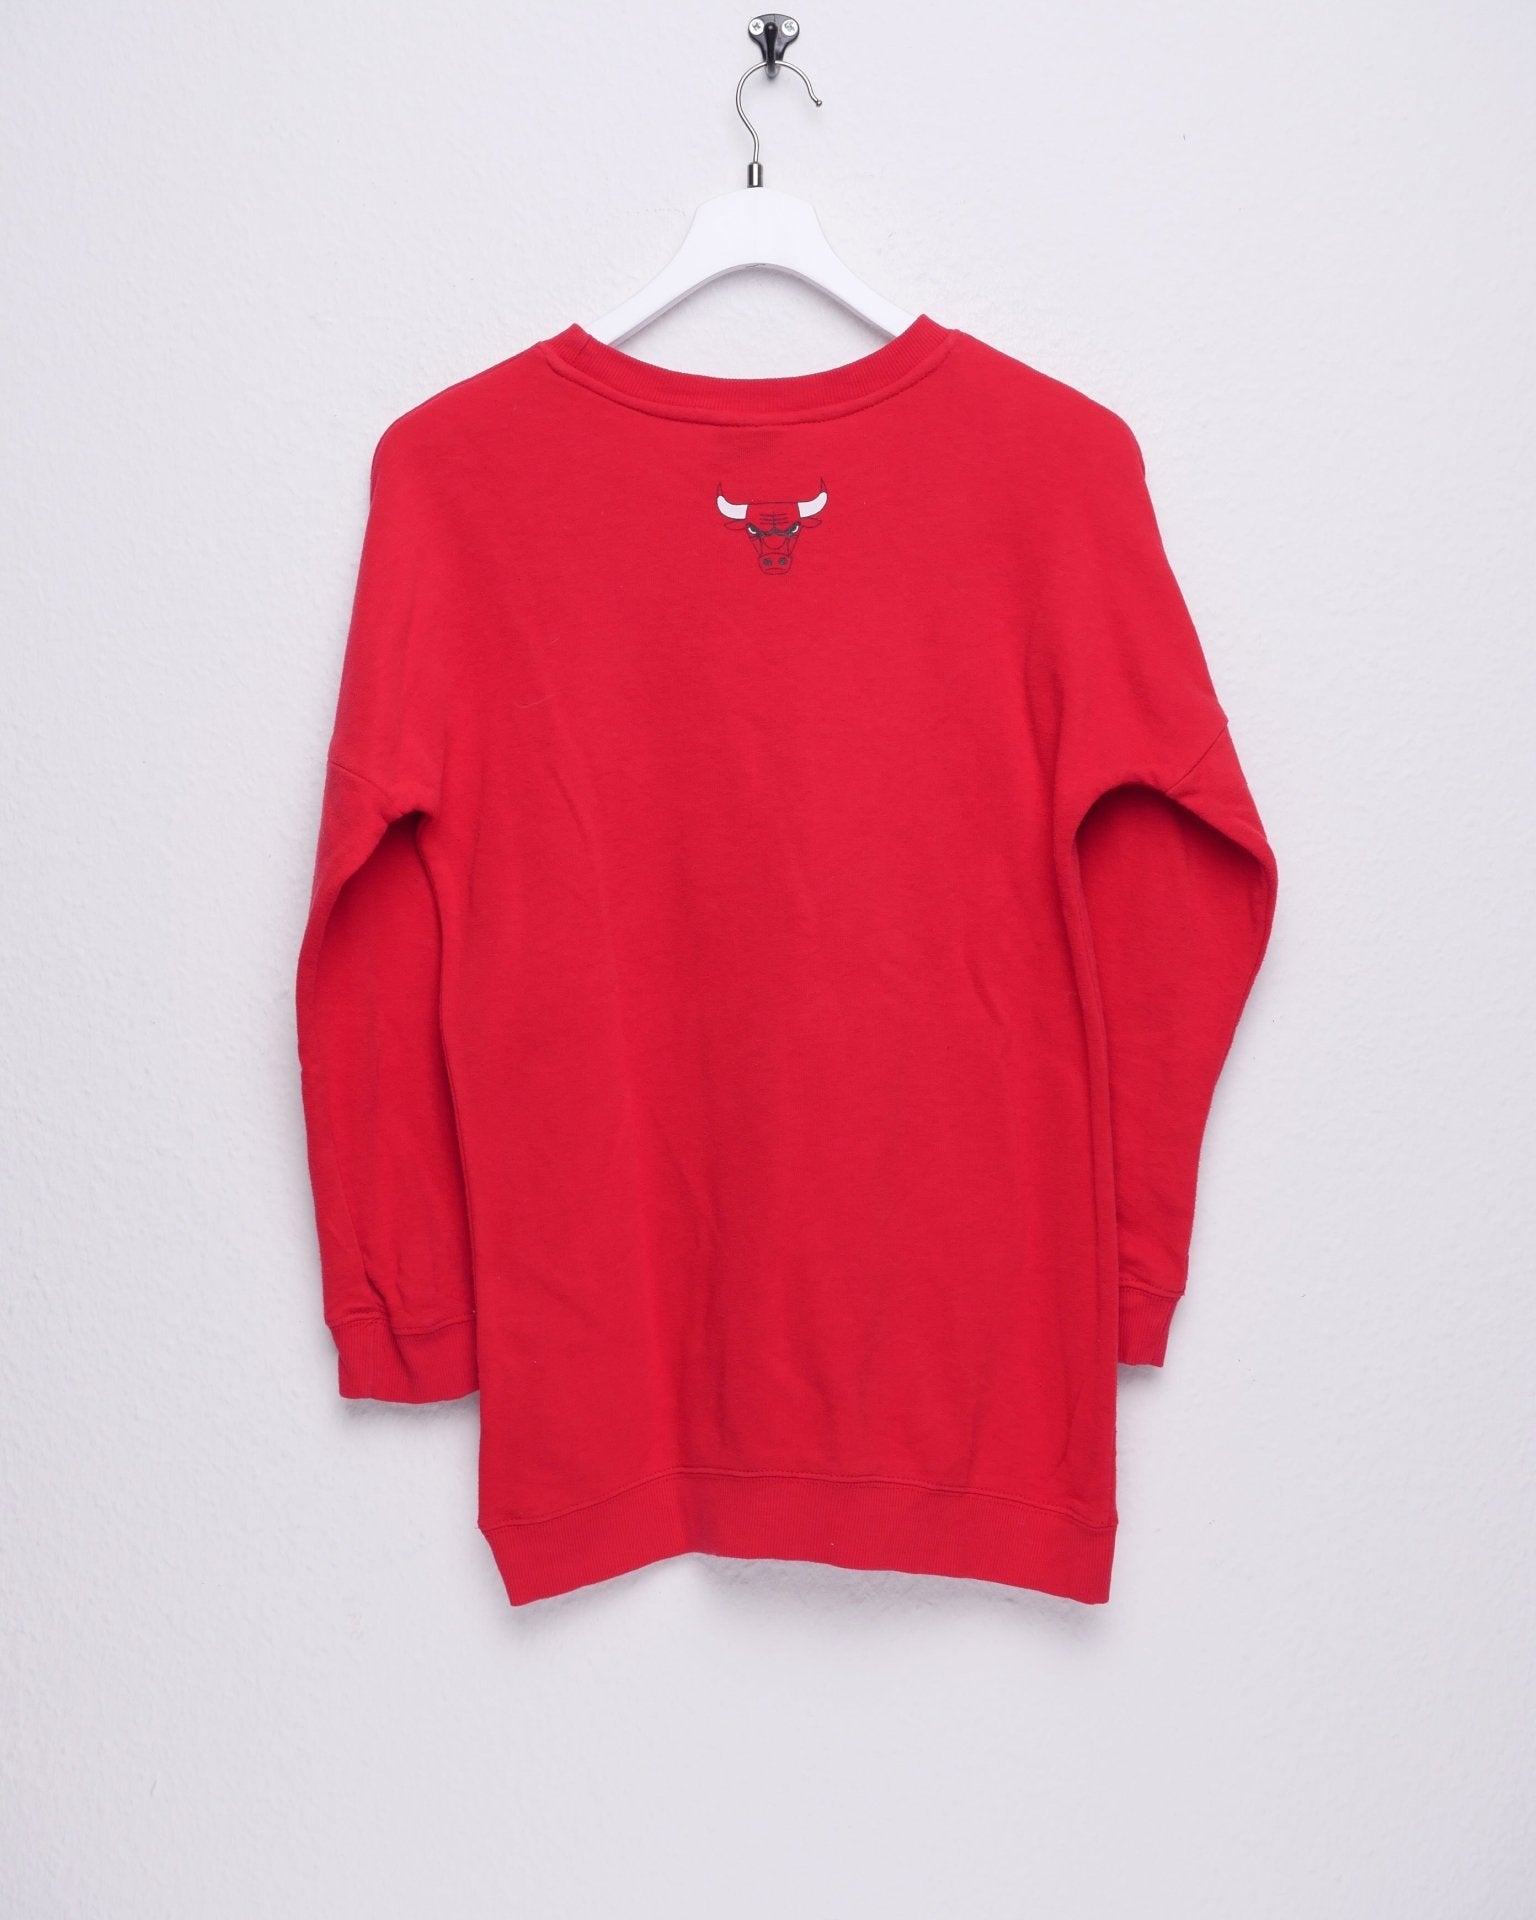 NBA 'Chicago Bulls' printed Graphic red Sweater - Peeces